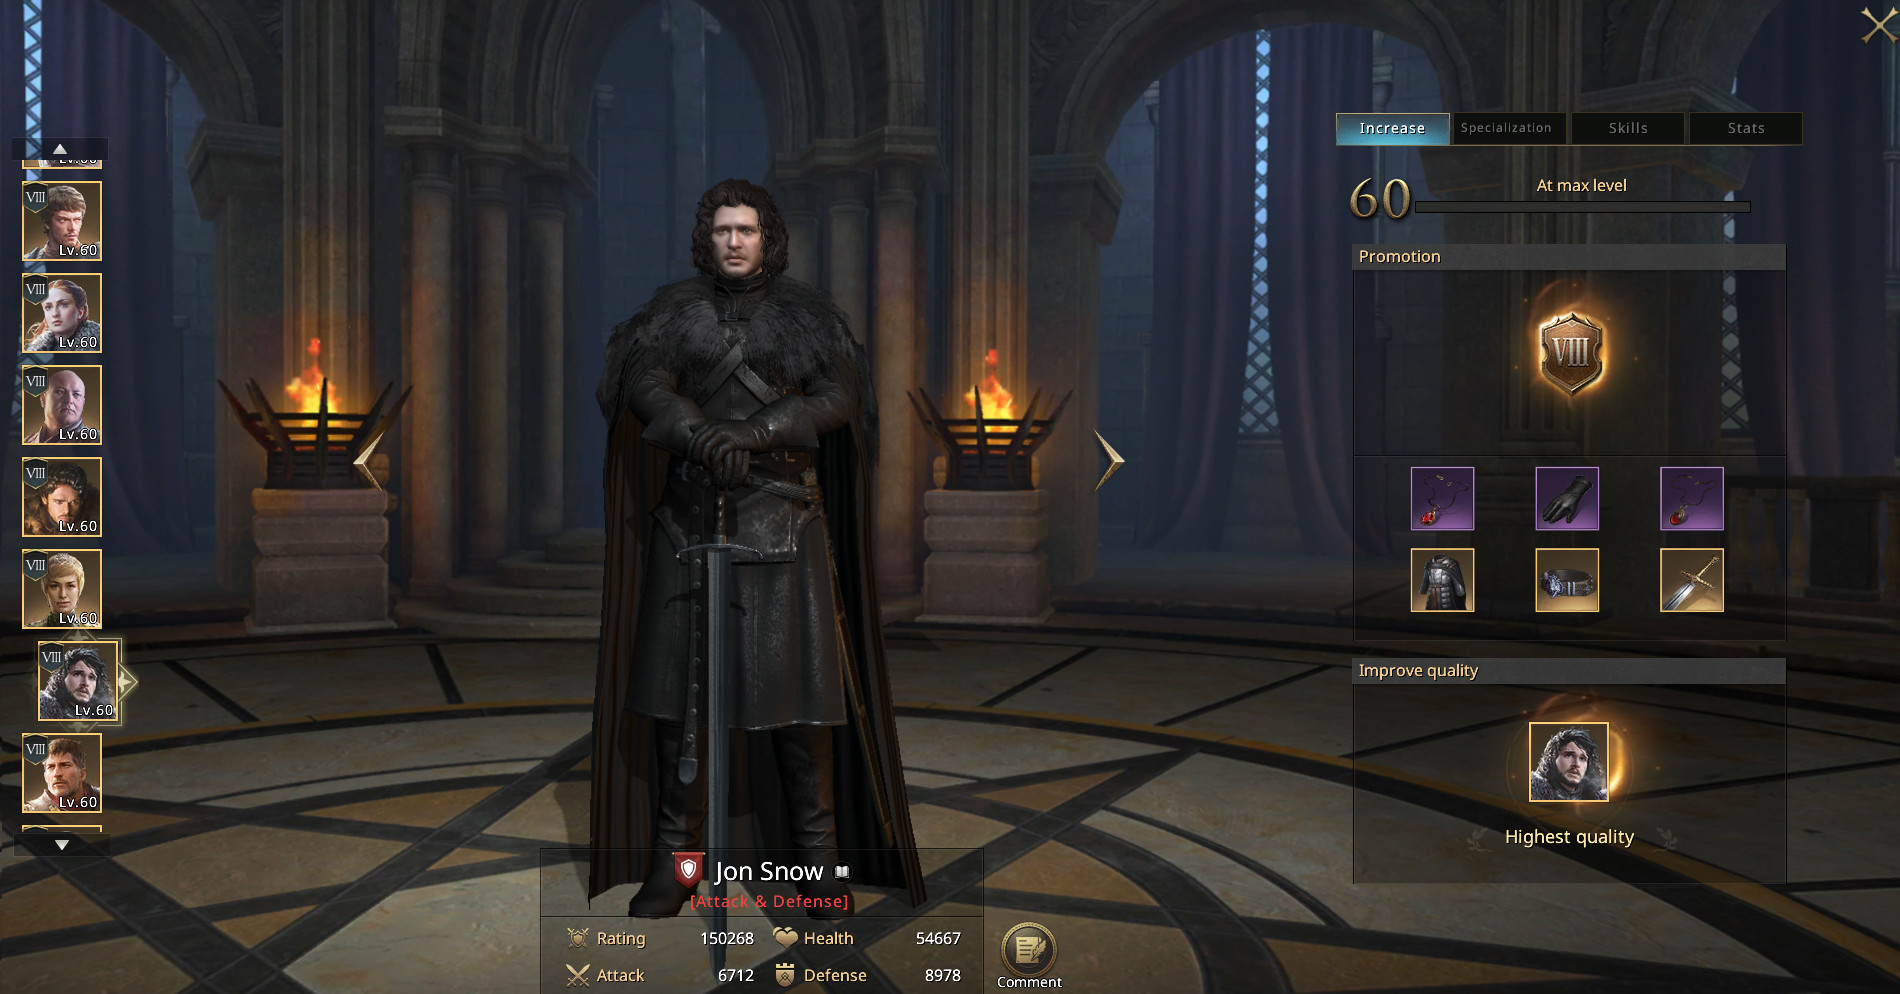 Review of Game of Thrones: Winter Is Coming - MMO & MMORPG Games